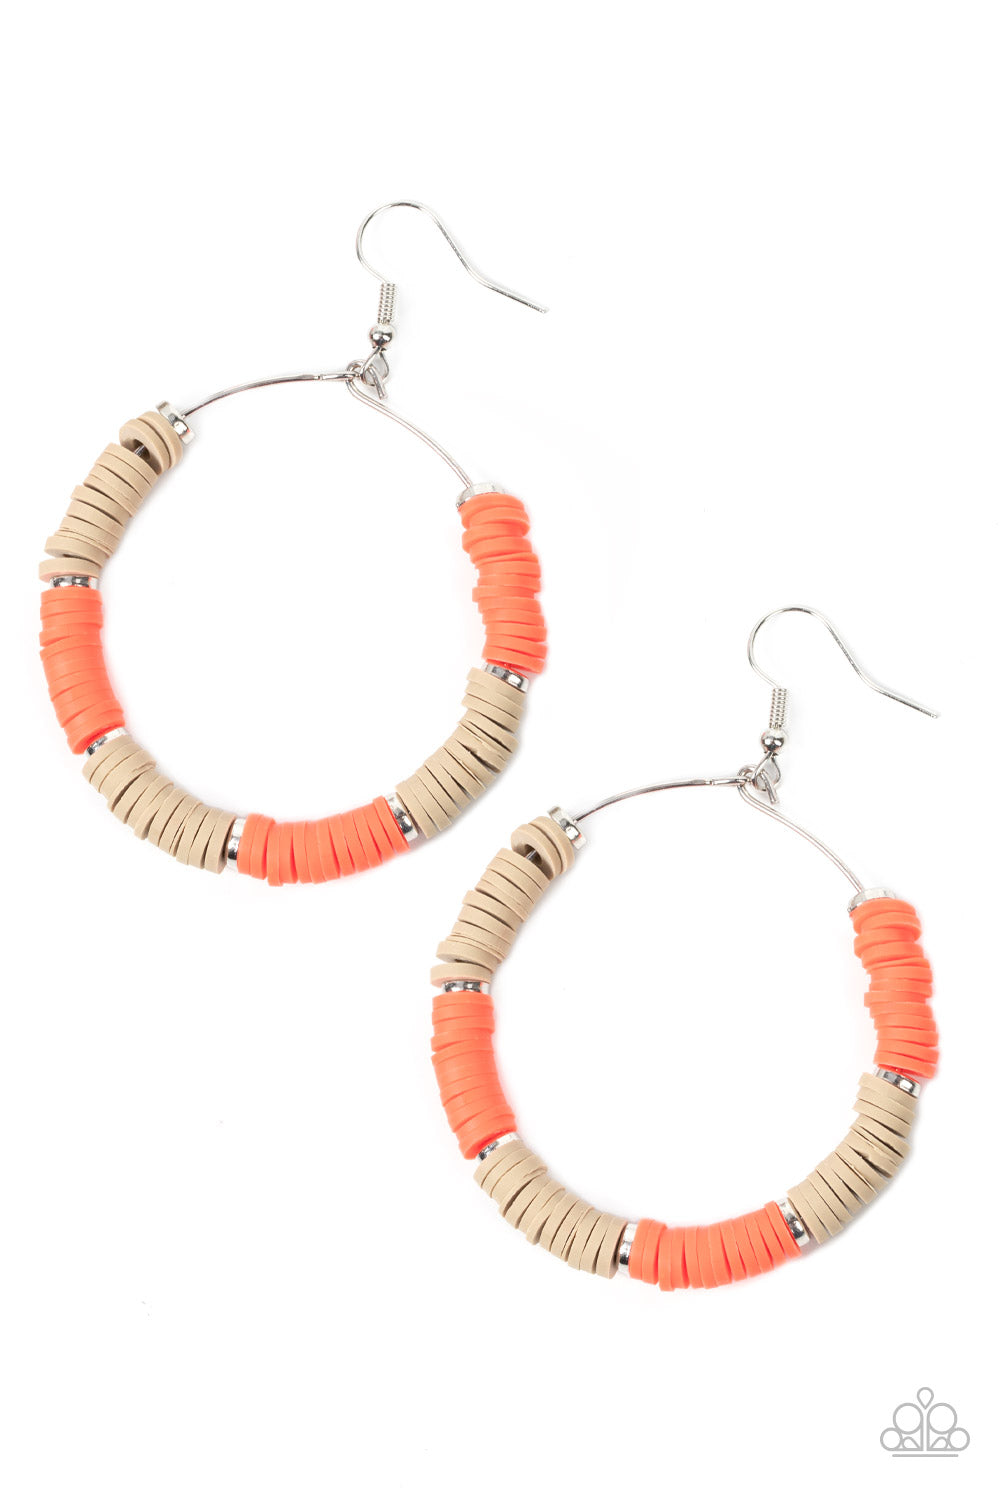 nfused with dainty silver accents, an earthy collection of rubbery tan and orange discs are threaded along a dainty silver wire hoop for a colorful look.